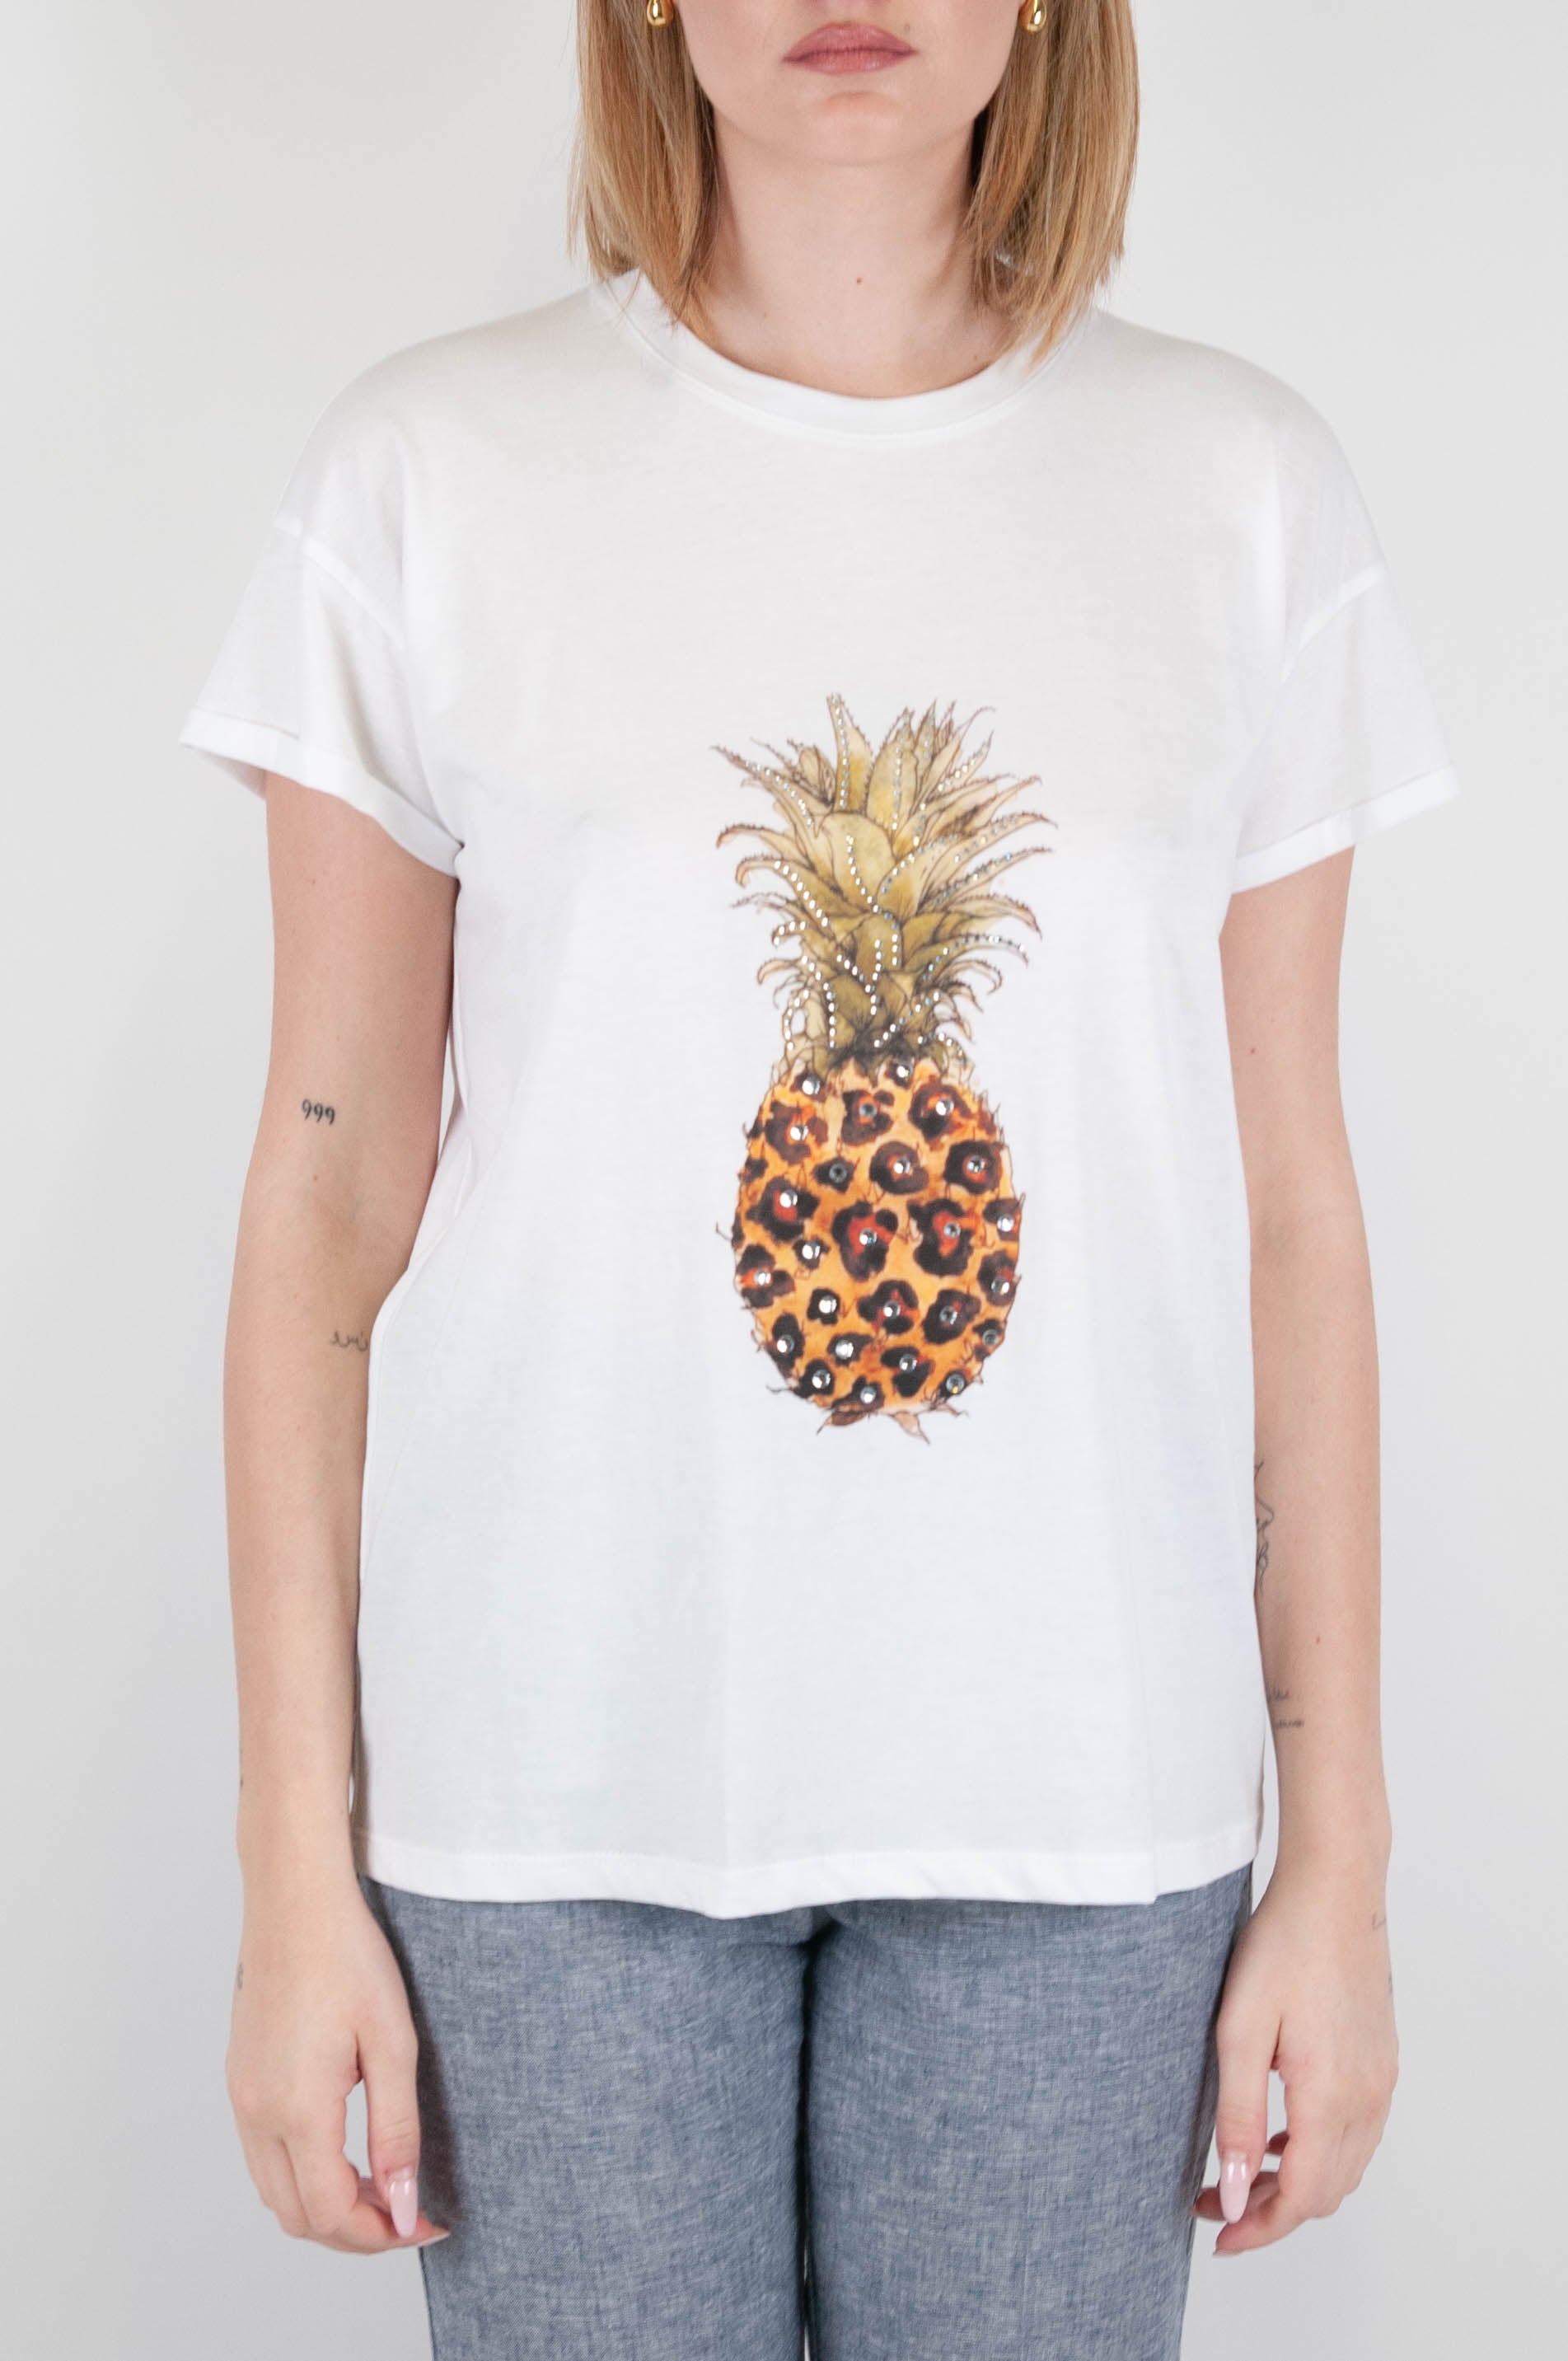 Tensione in - T-shirt stampa ananas con strass